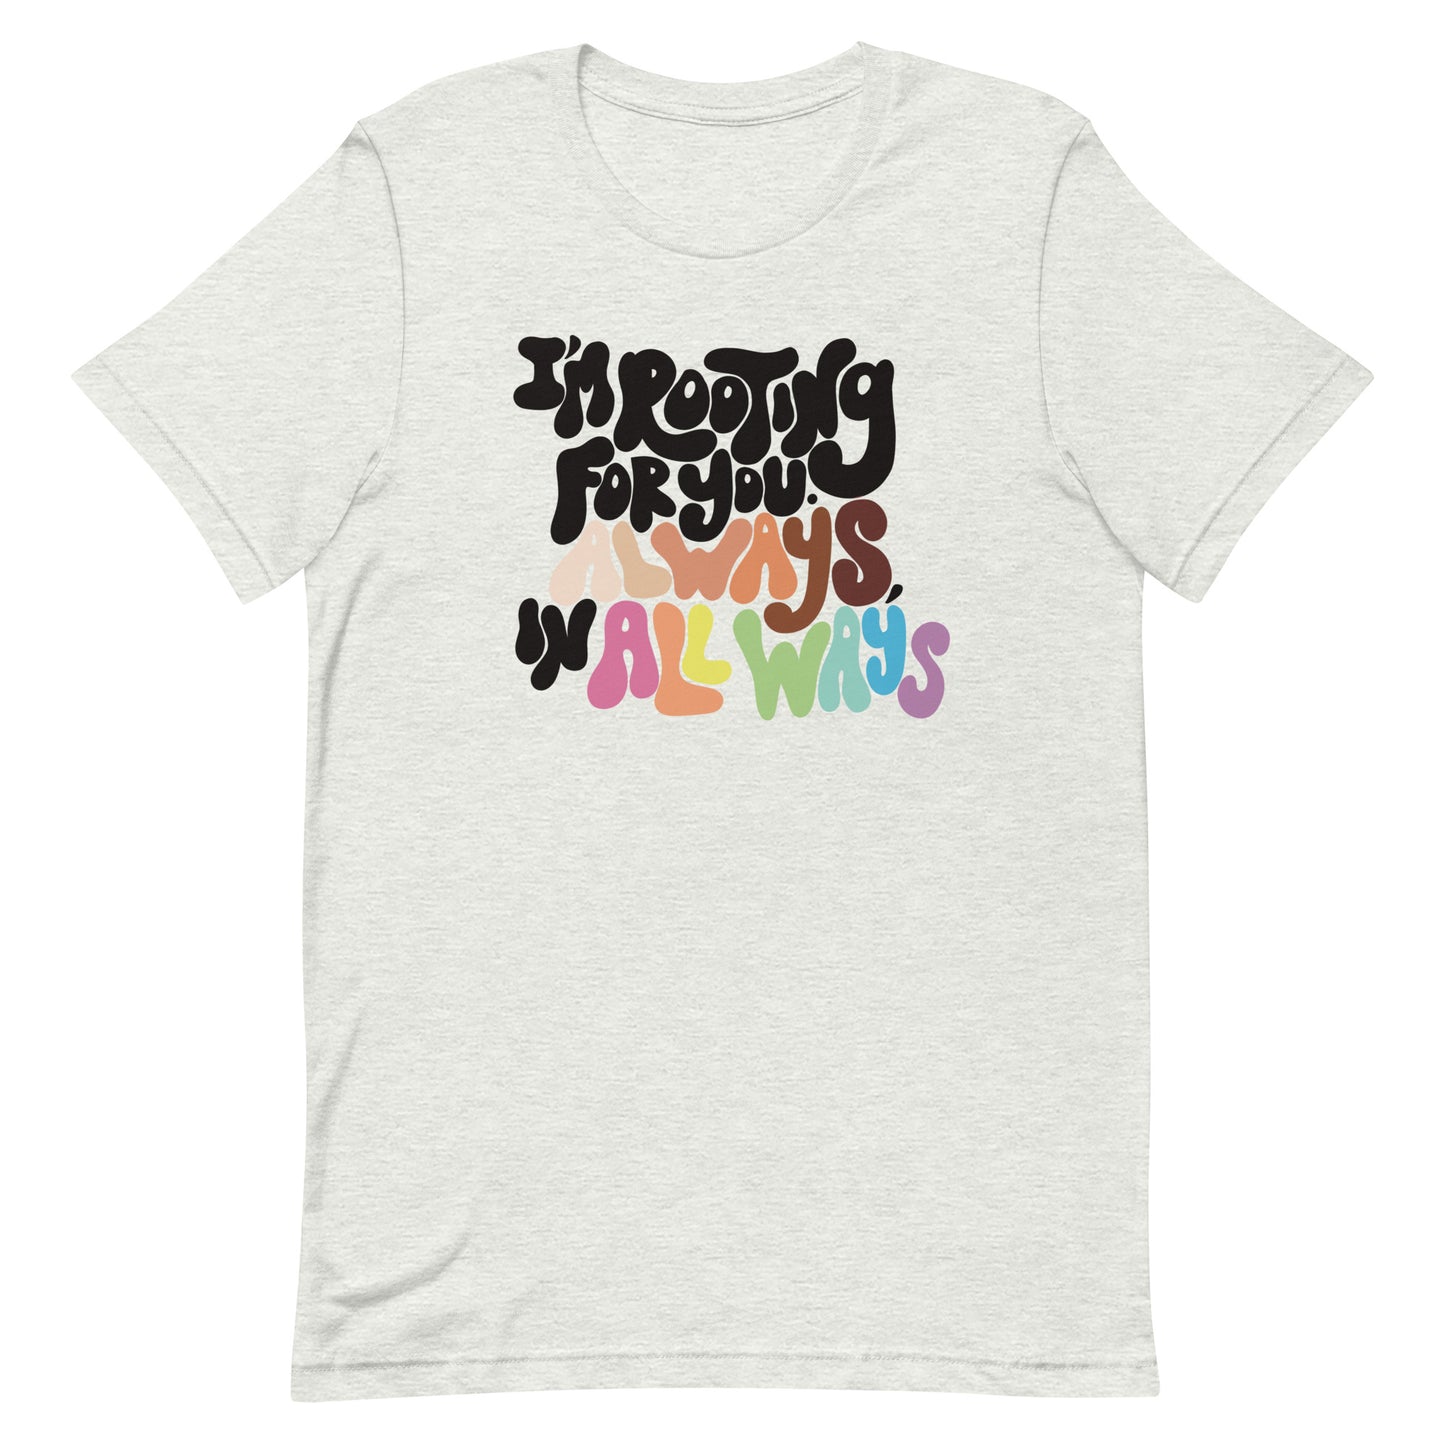 I'm Rooting for You. Always, in All Ways Diversity Shirt